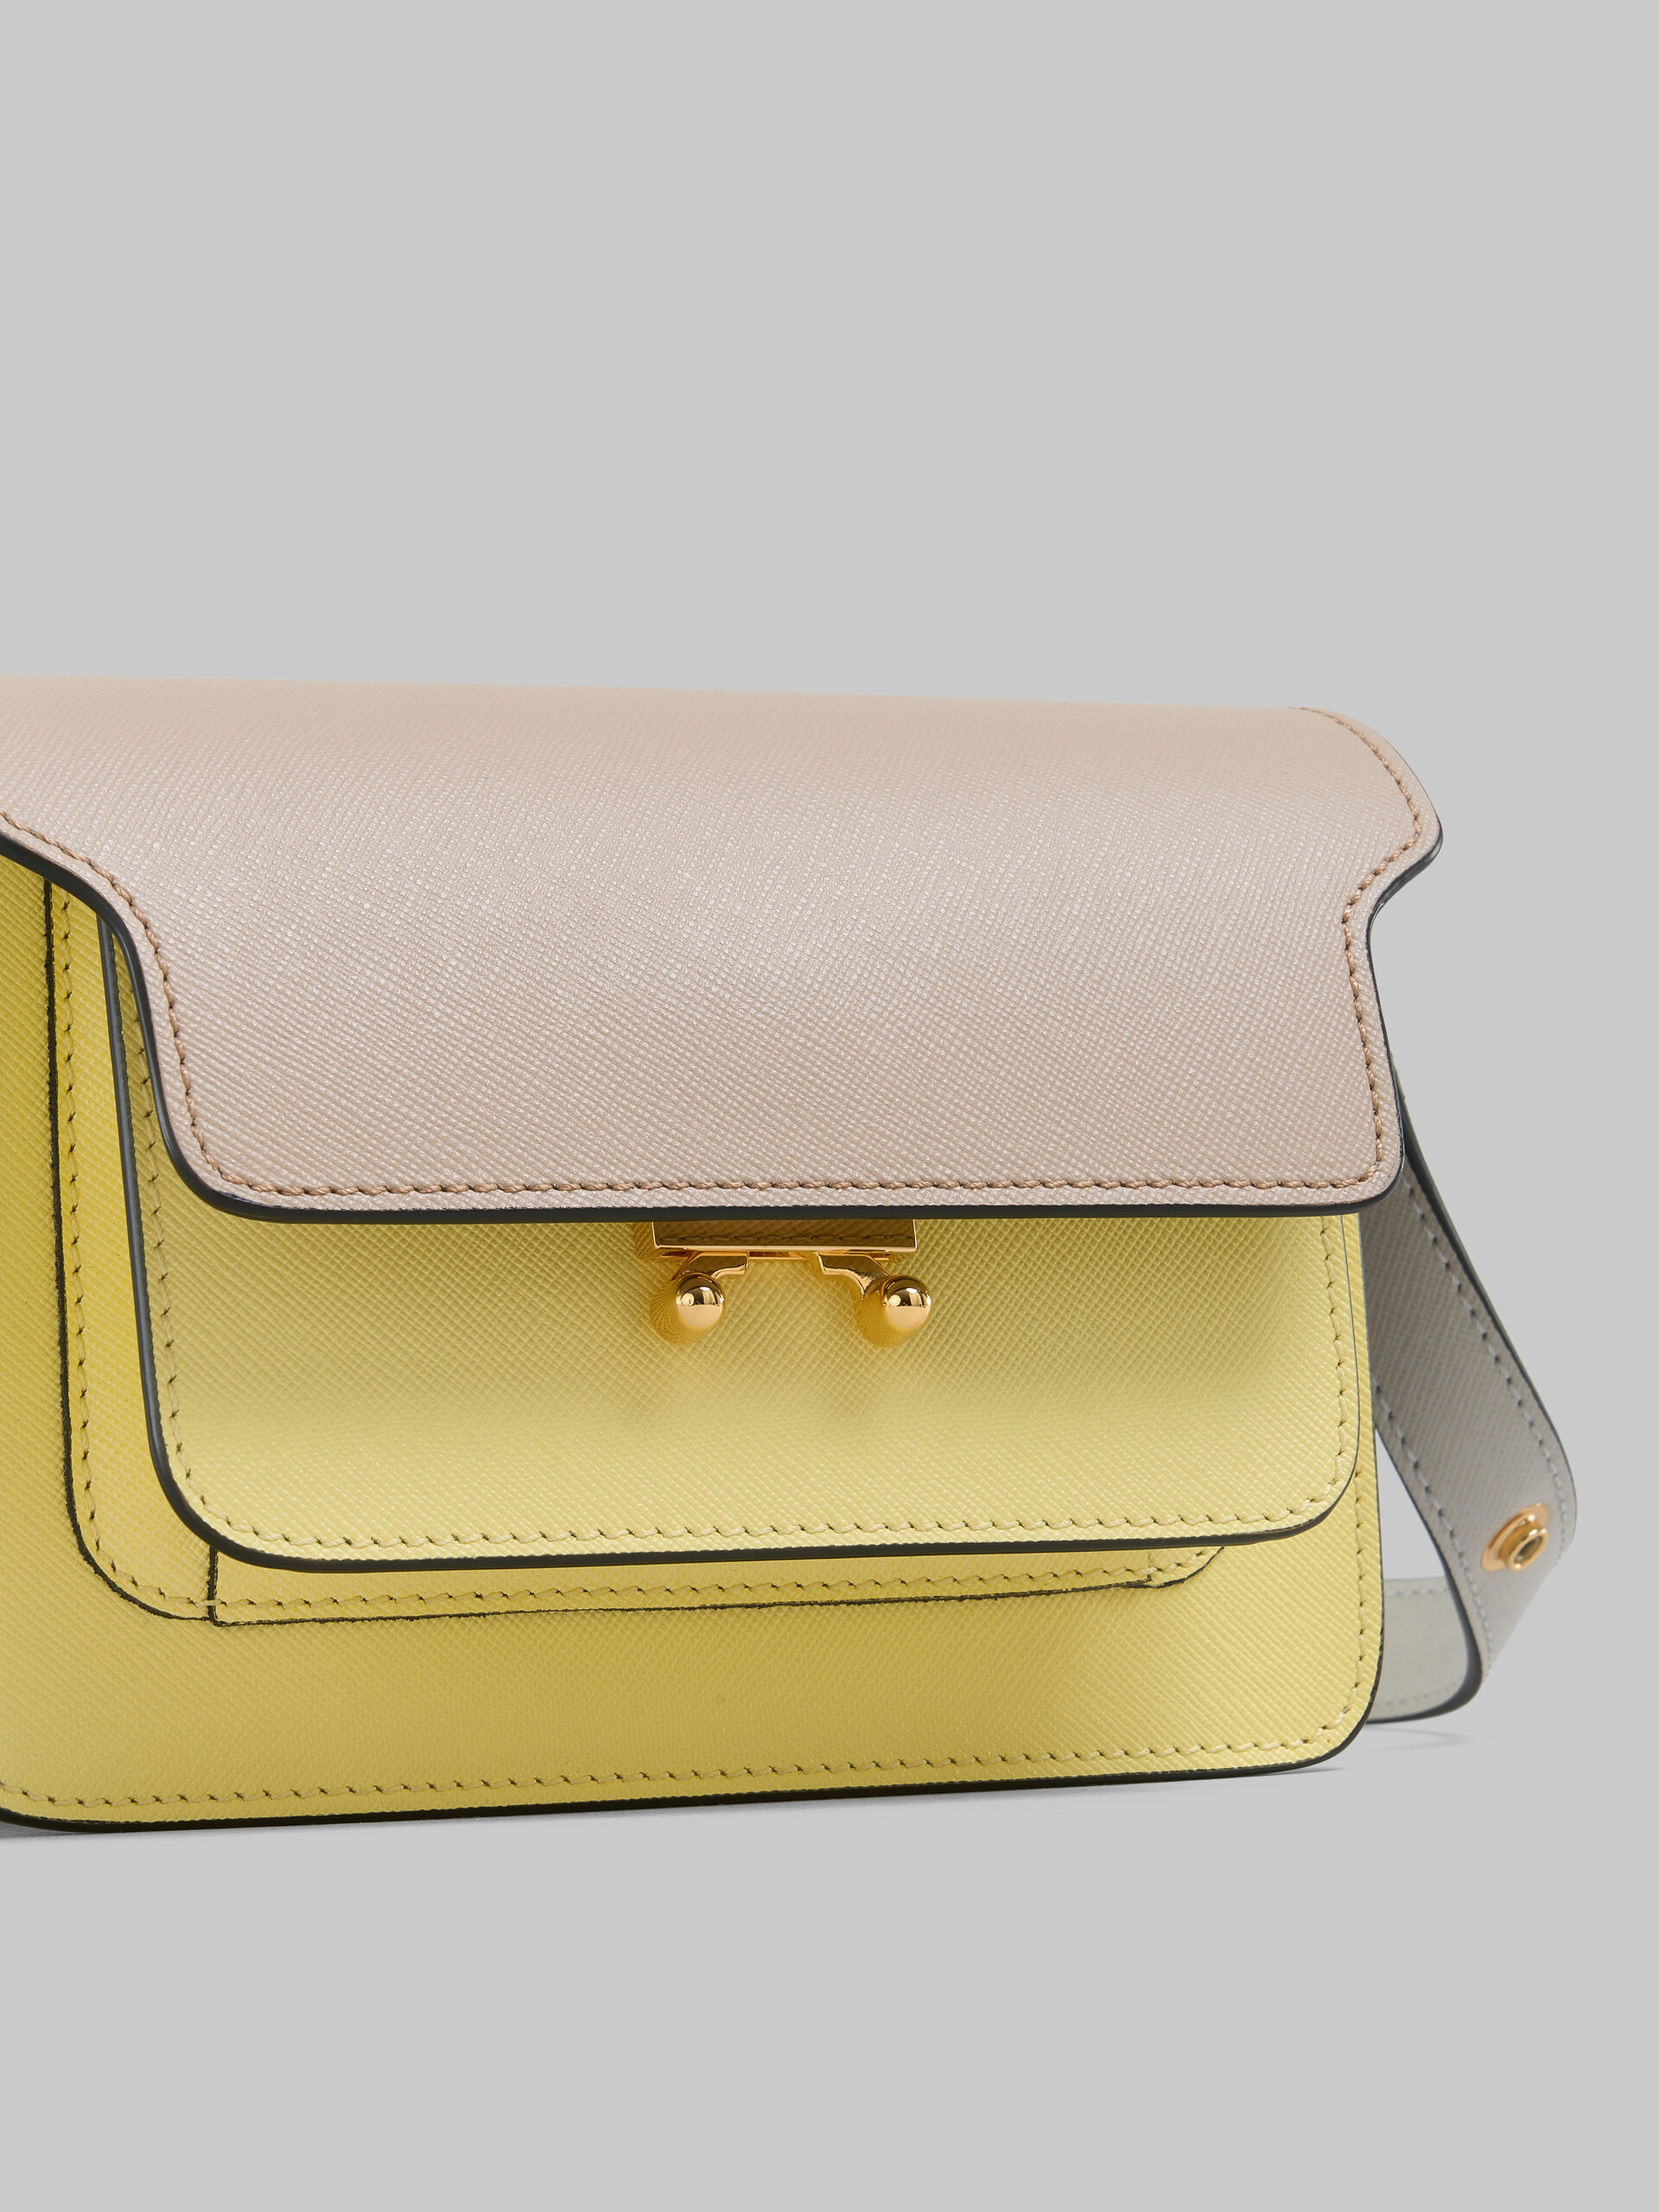 Tan yellow and grey saffiano leather mini Trunk bag - Shoulder Bags - Image 5